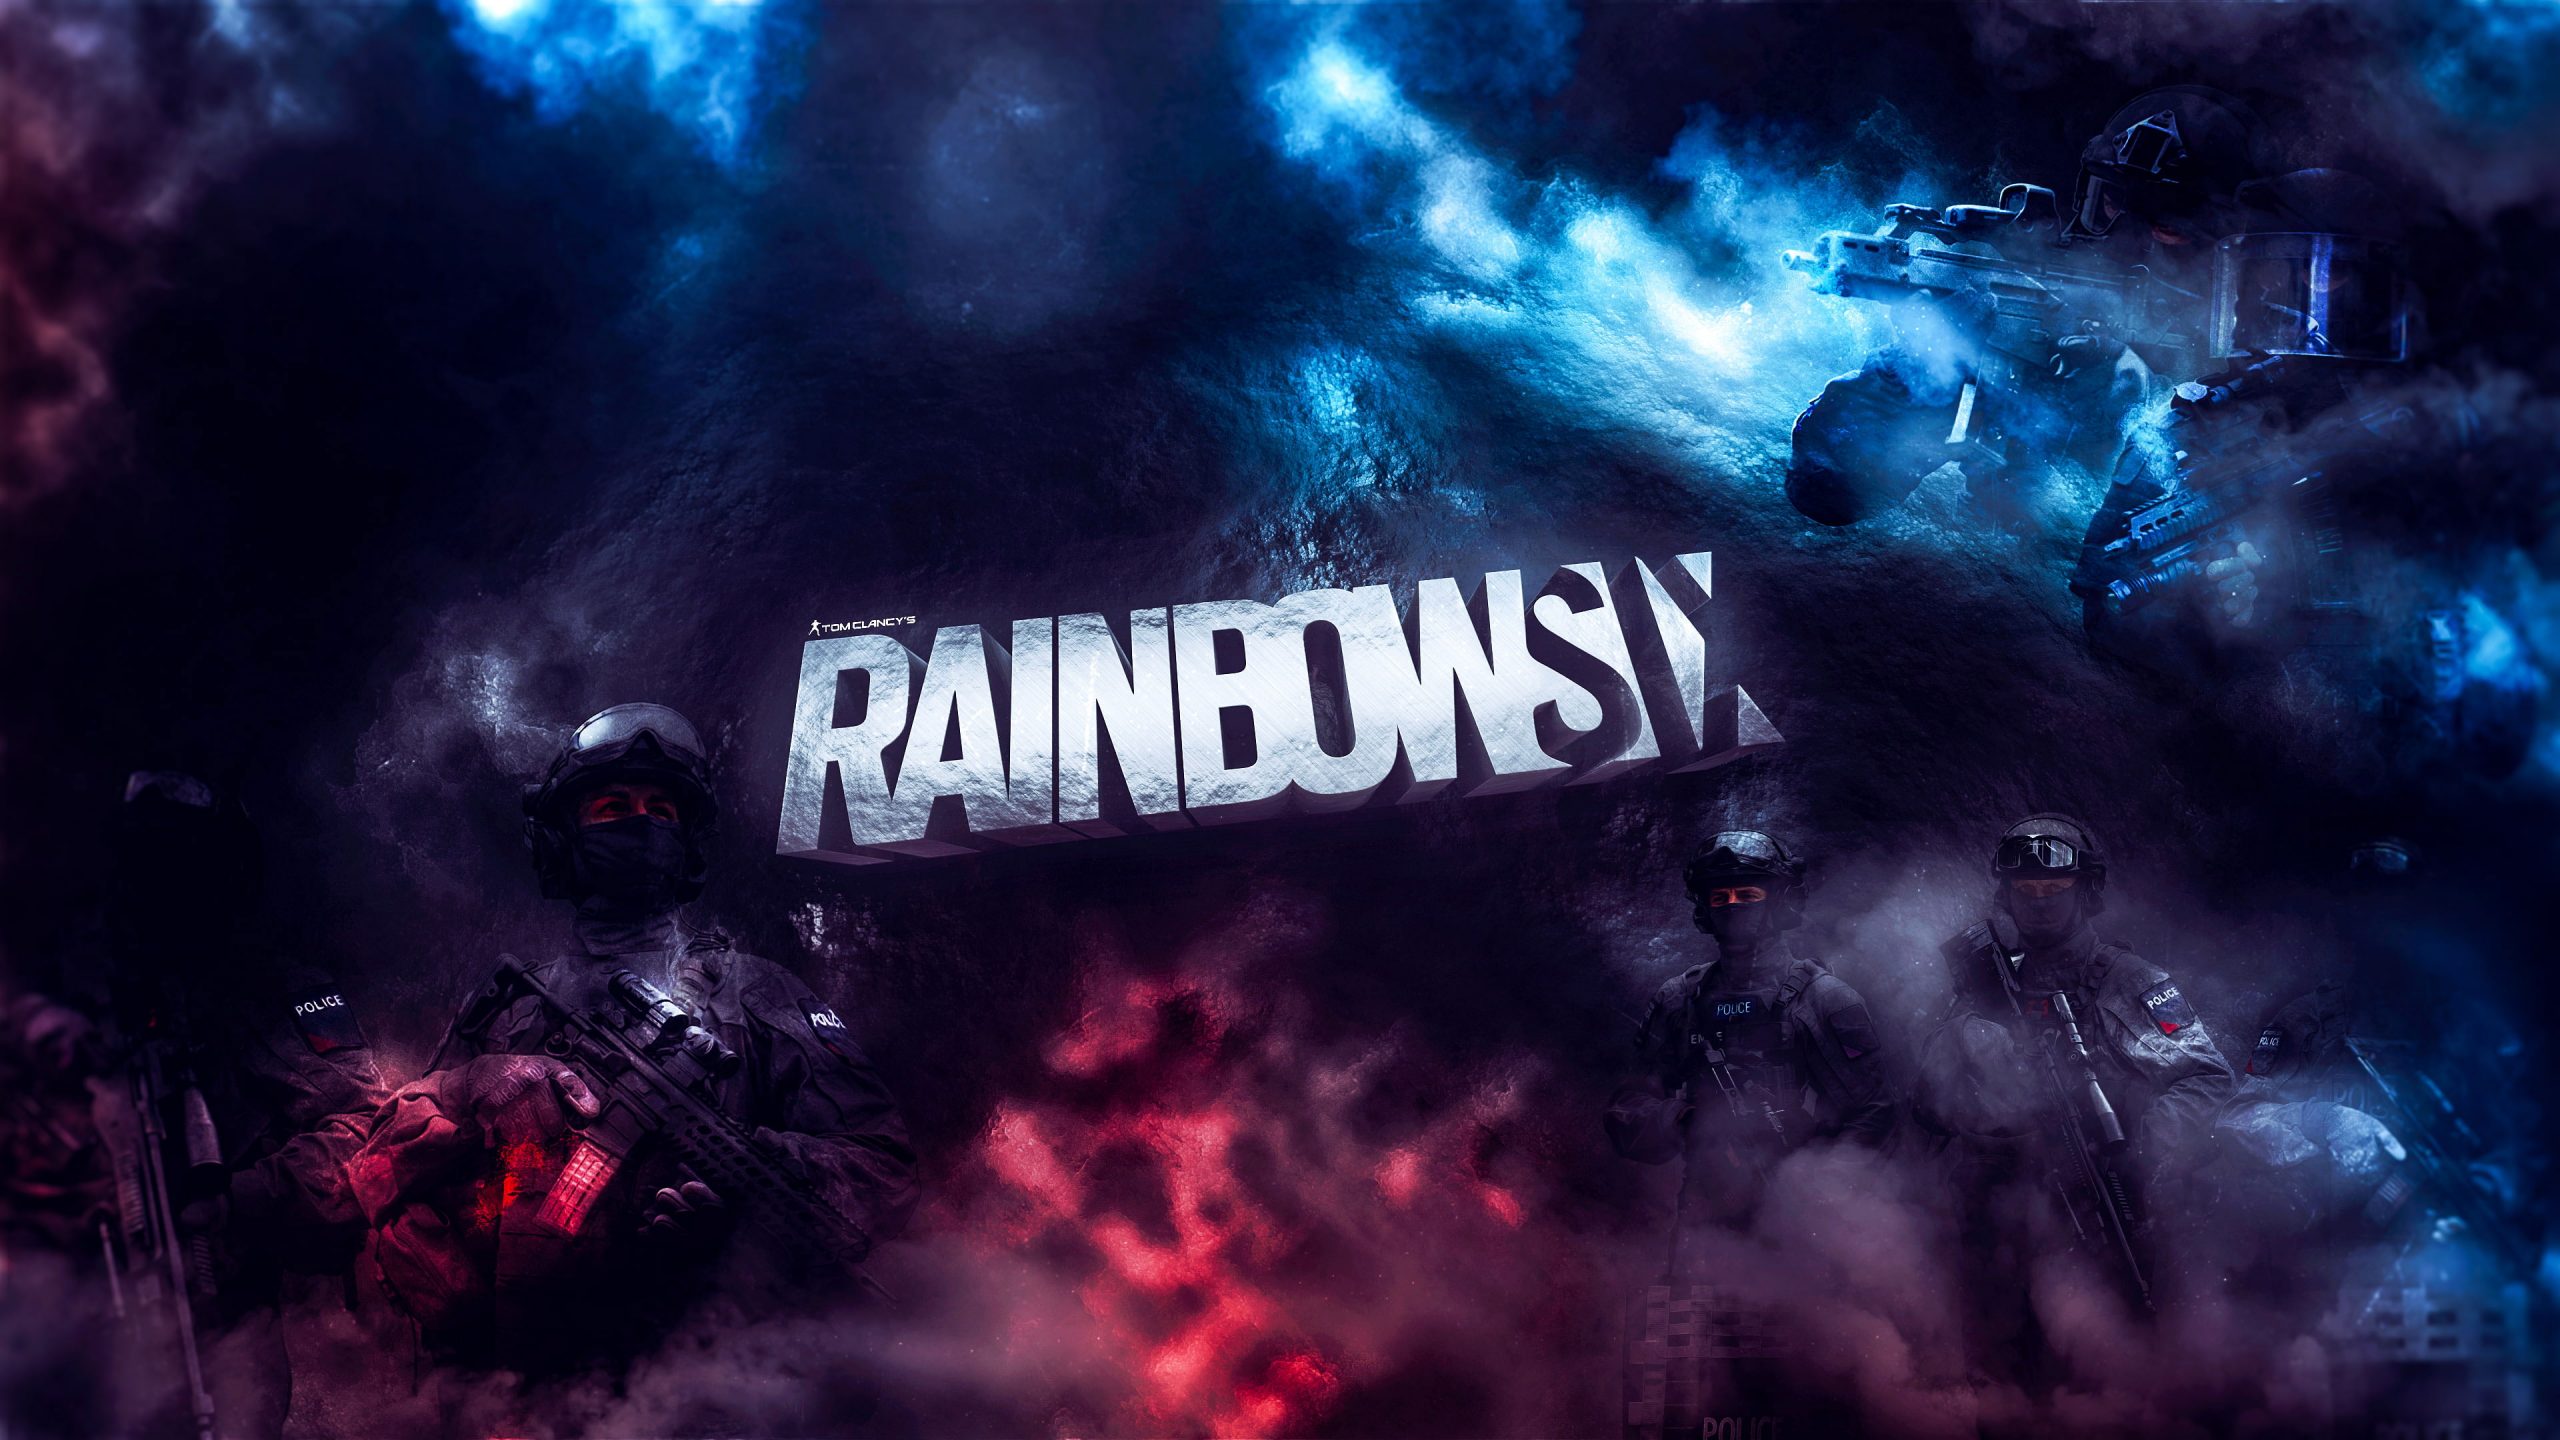 Wallpaper Rainbow 6 Siege, Video Games, Games Posters